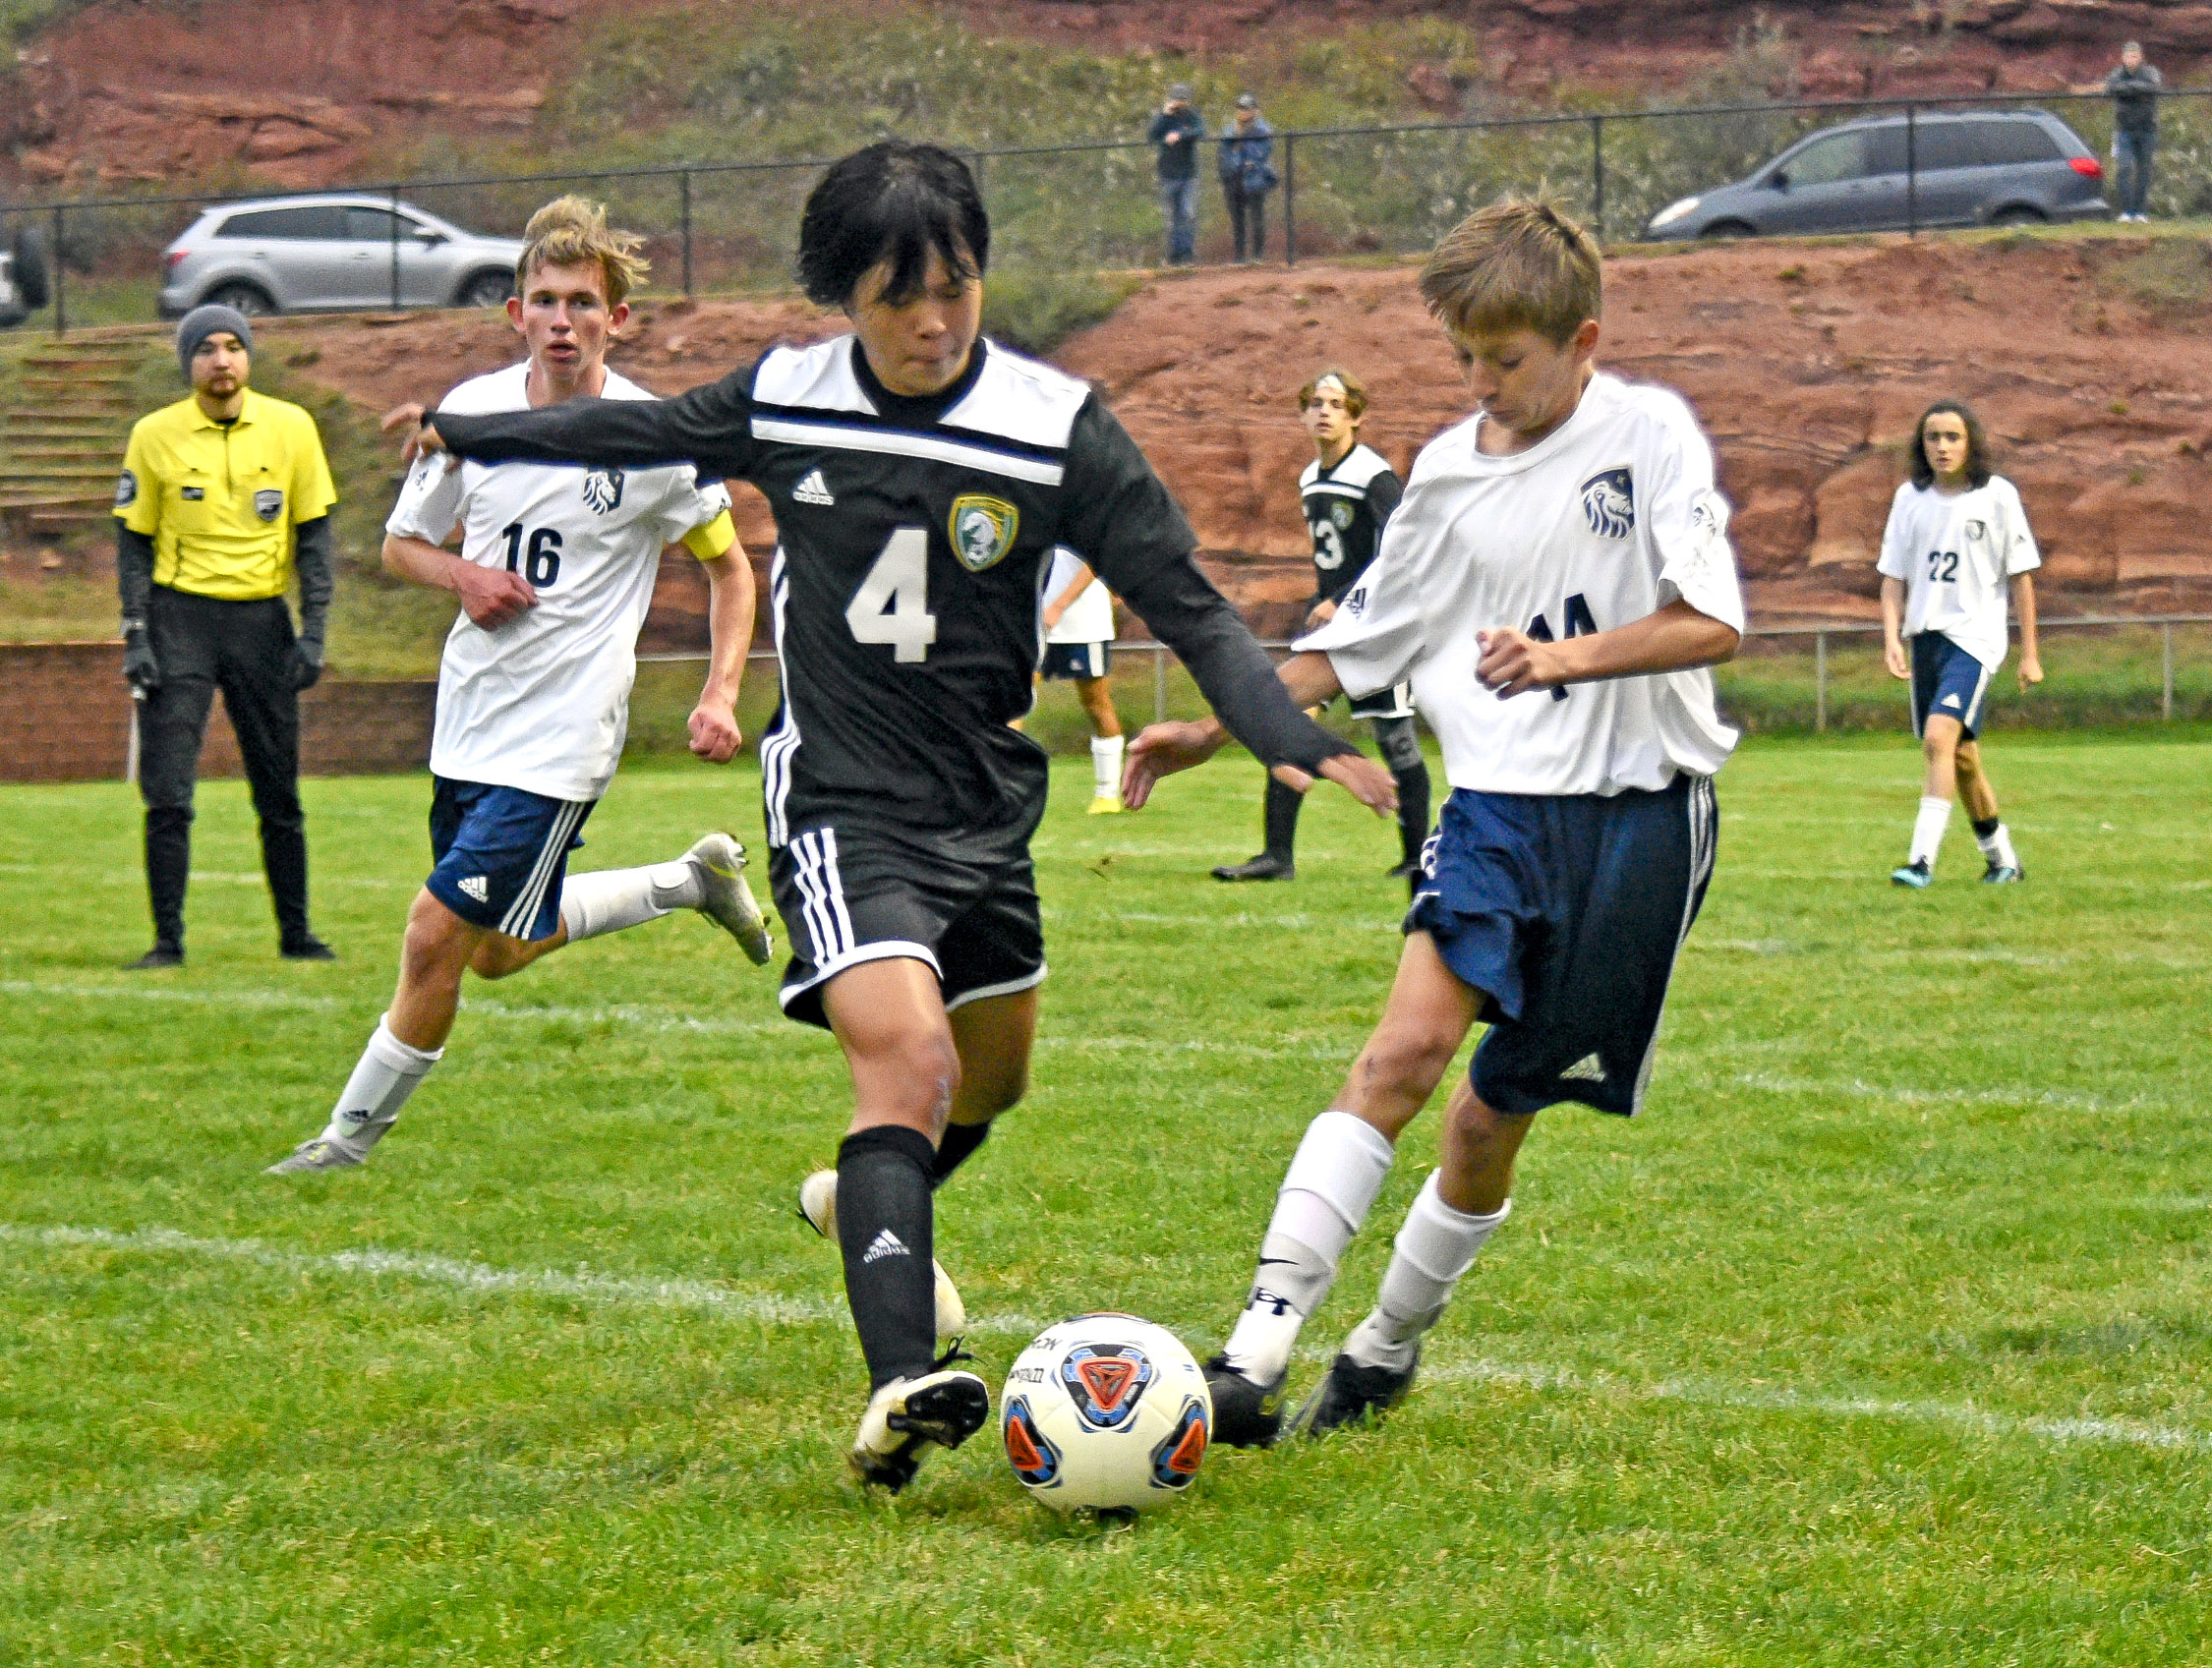 Photo by Bryan Oller. Graham Beckum fends off a Colorado Springs Christian School player during their match.